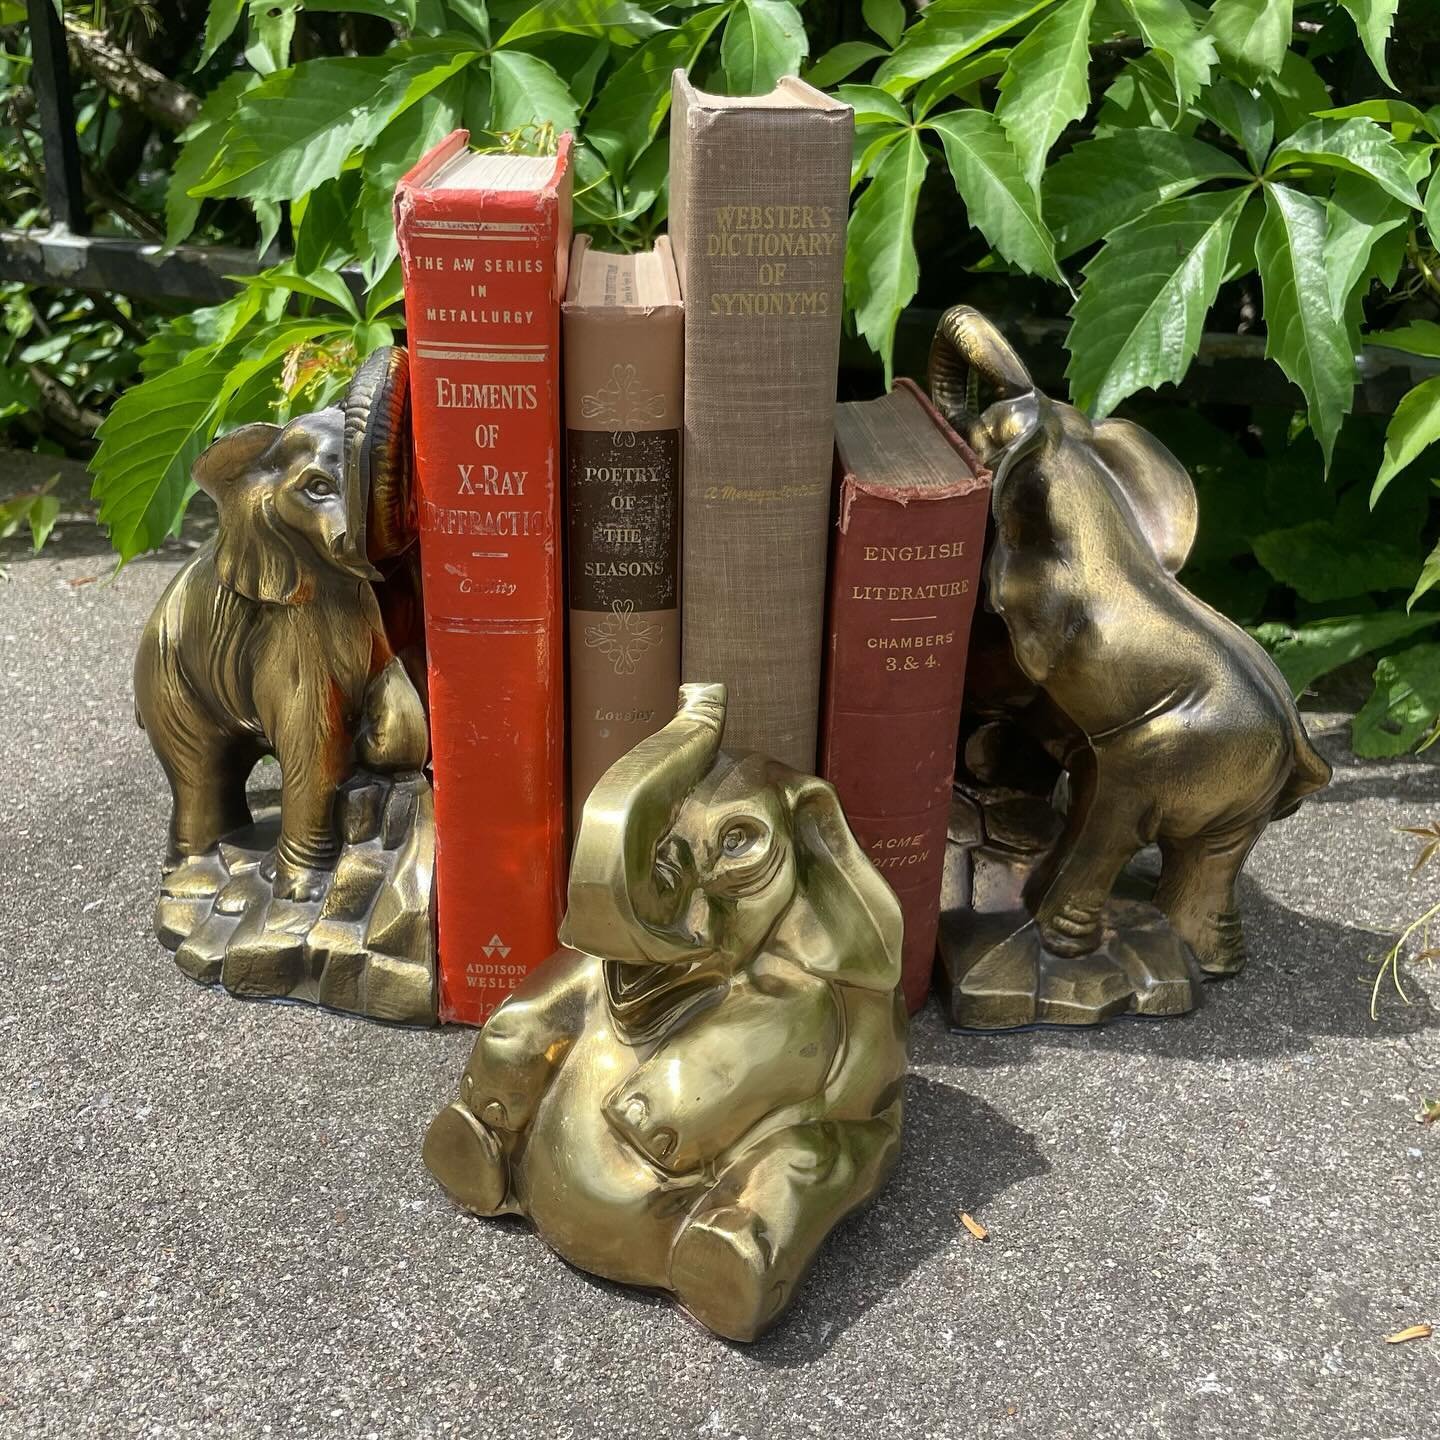 Can you even with these 🐘 🐘🐘 friends! 1975 golden elephant bookends $40. And chonky brass elephant $34.